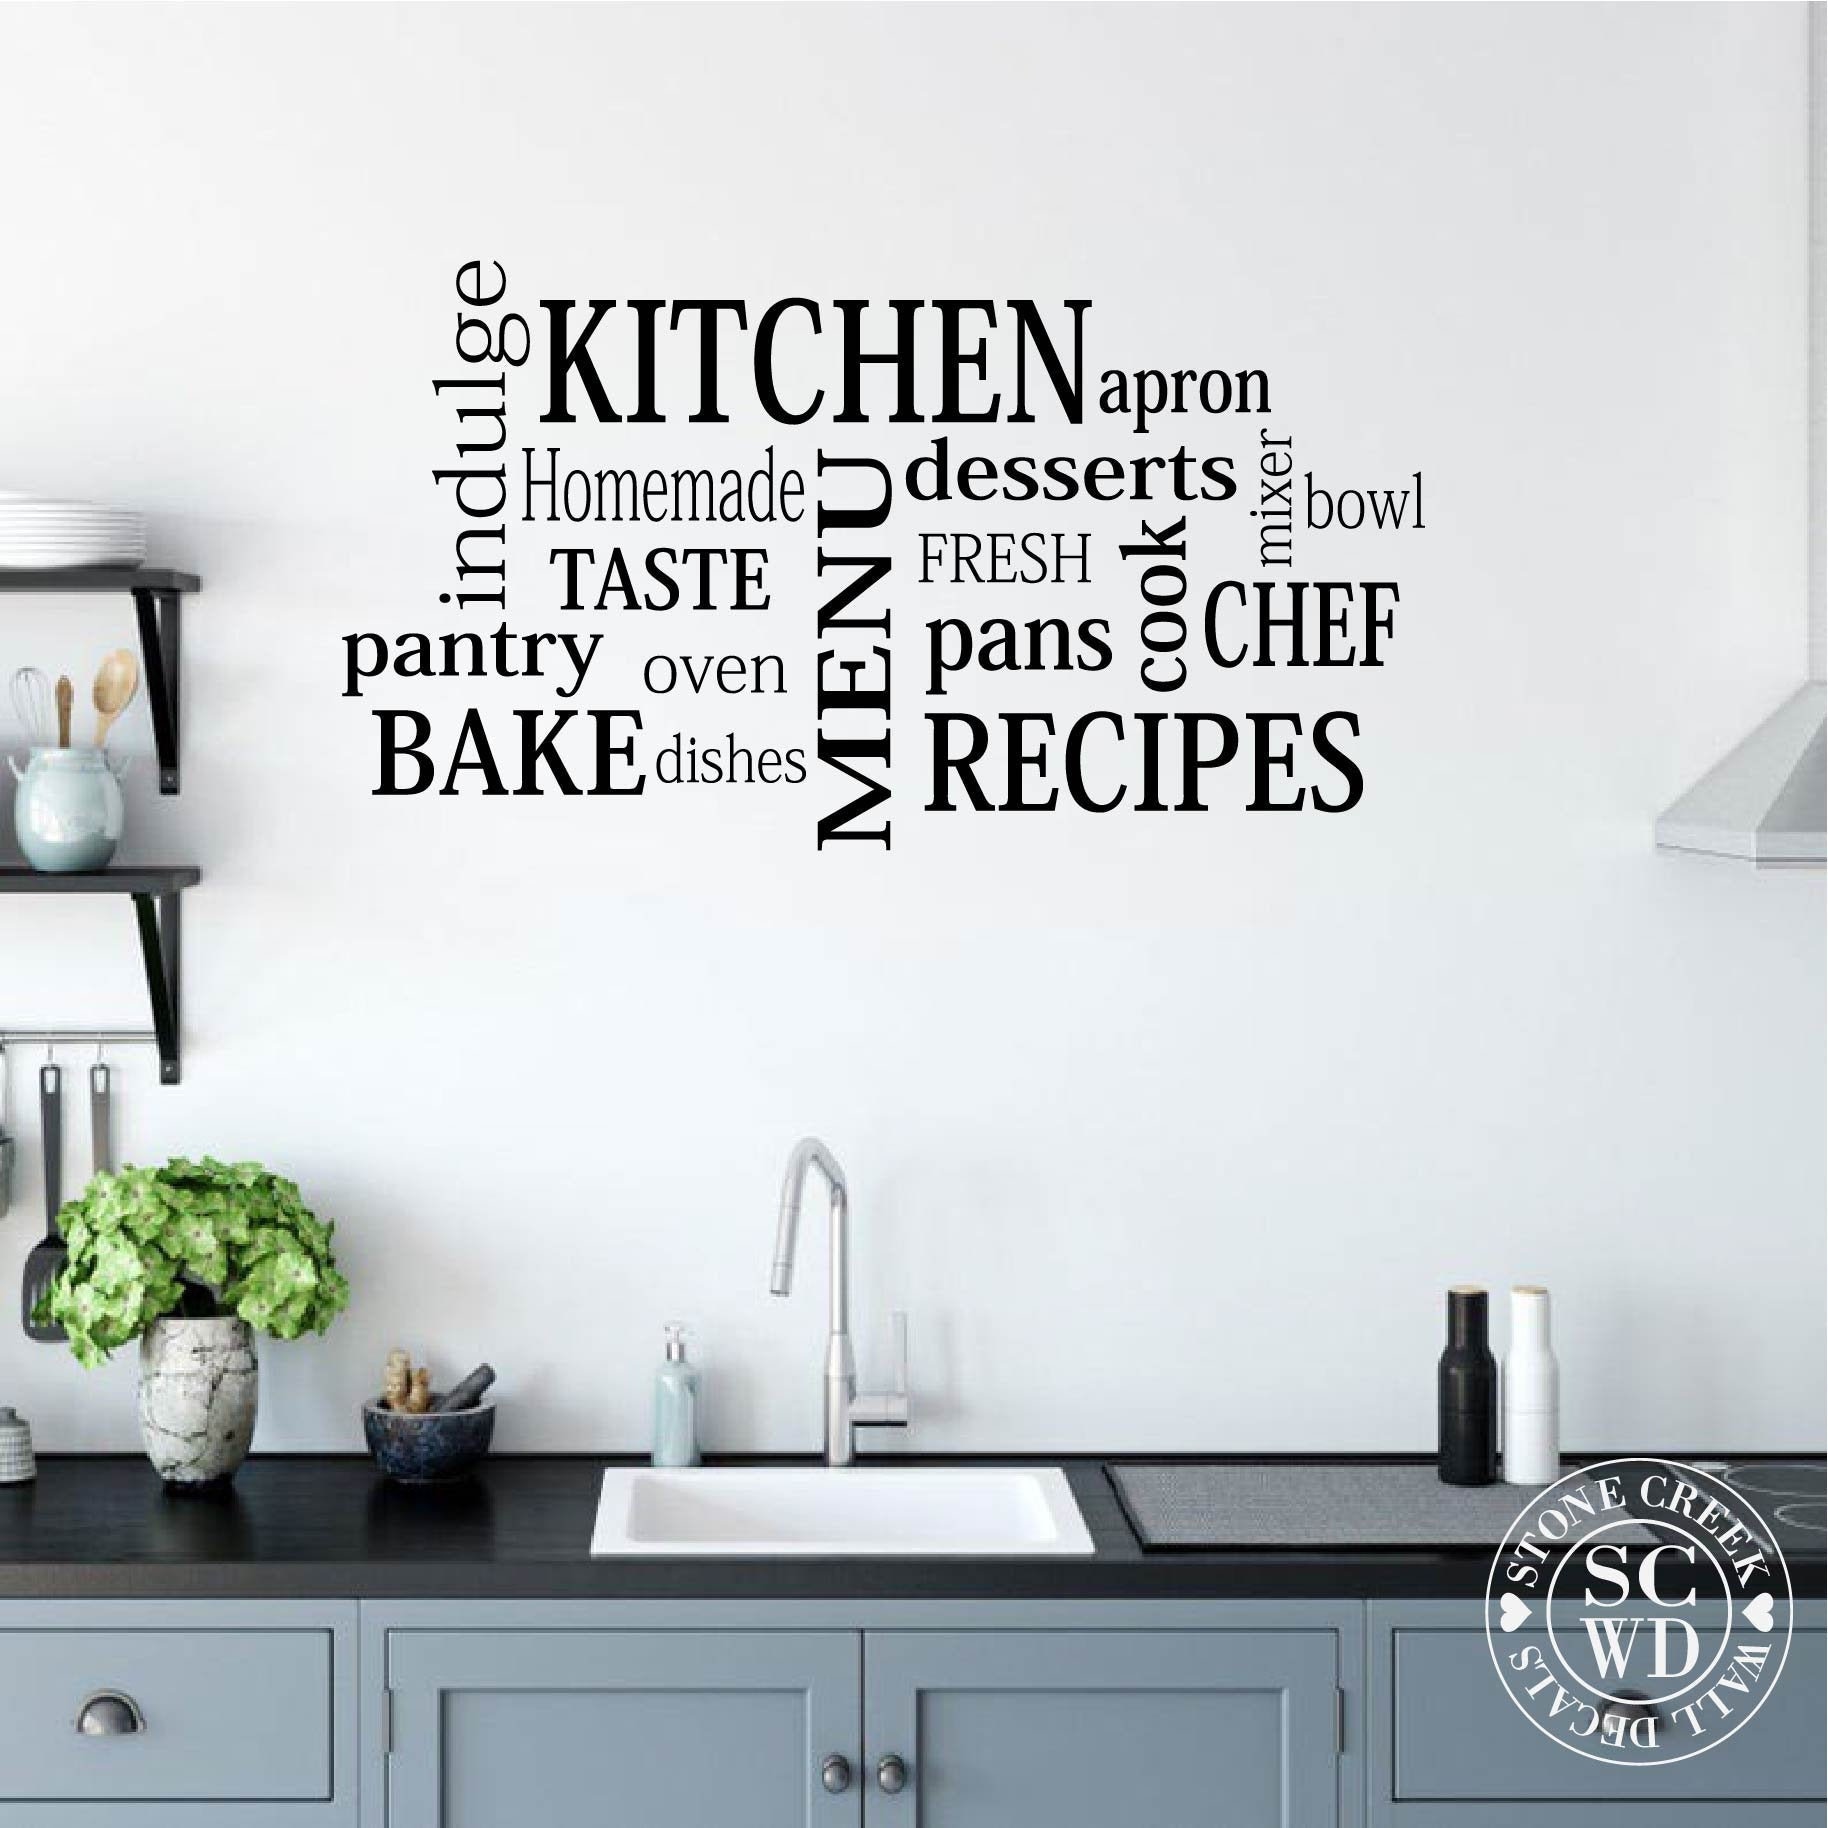 Custom kitchen wall decal LARGE  1000mmx415mm 